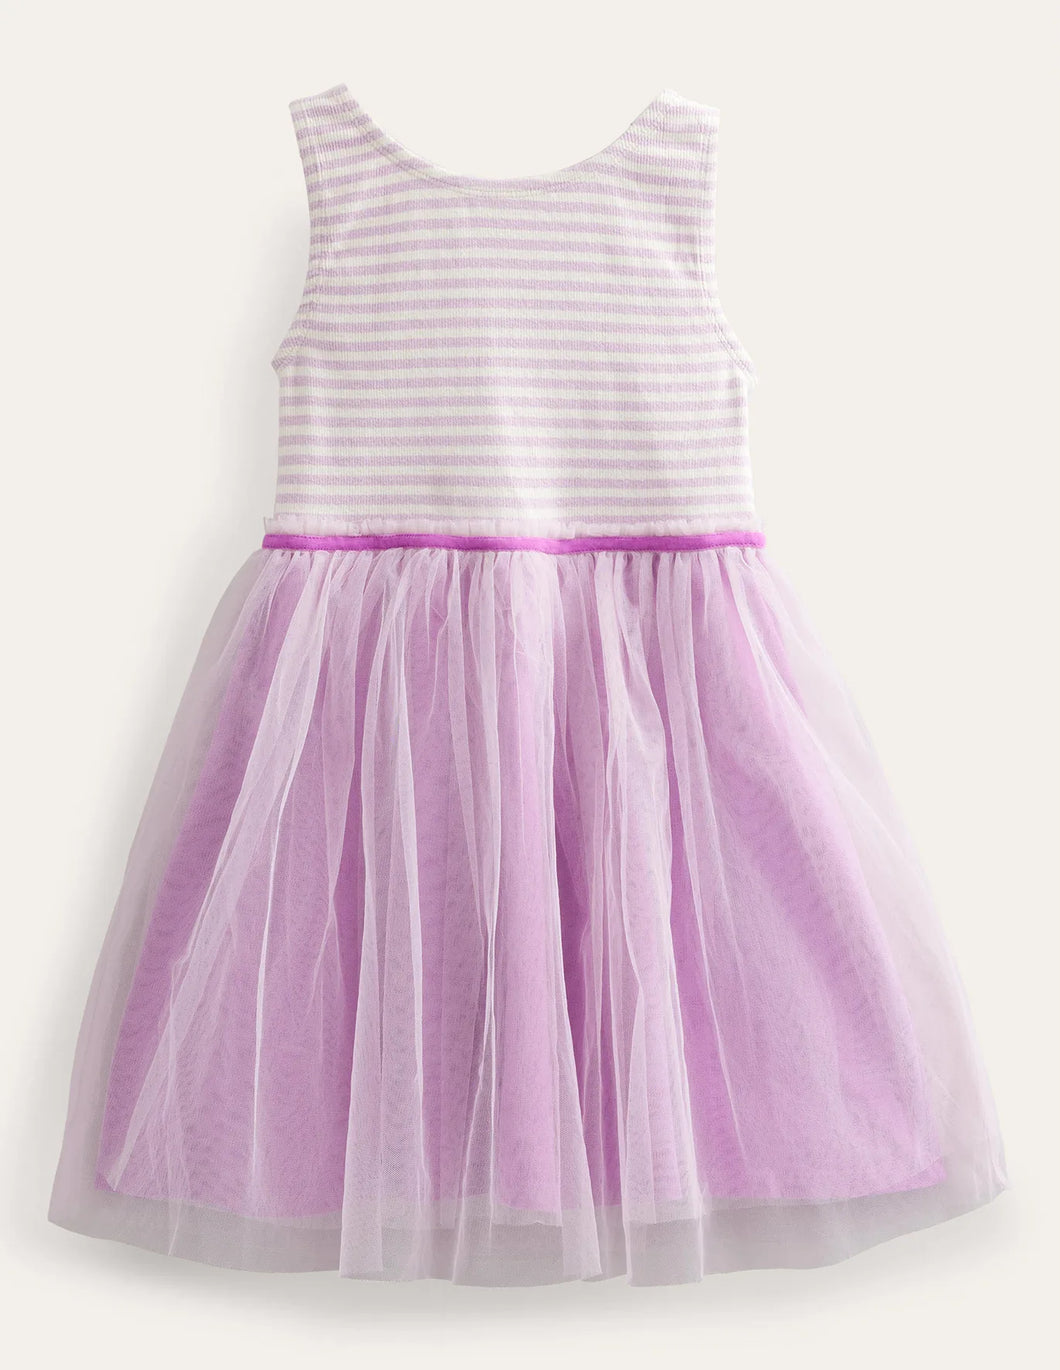 NWT Mini Boden Tulle Jersey Dress